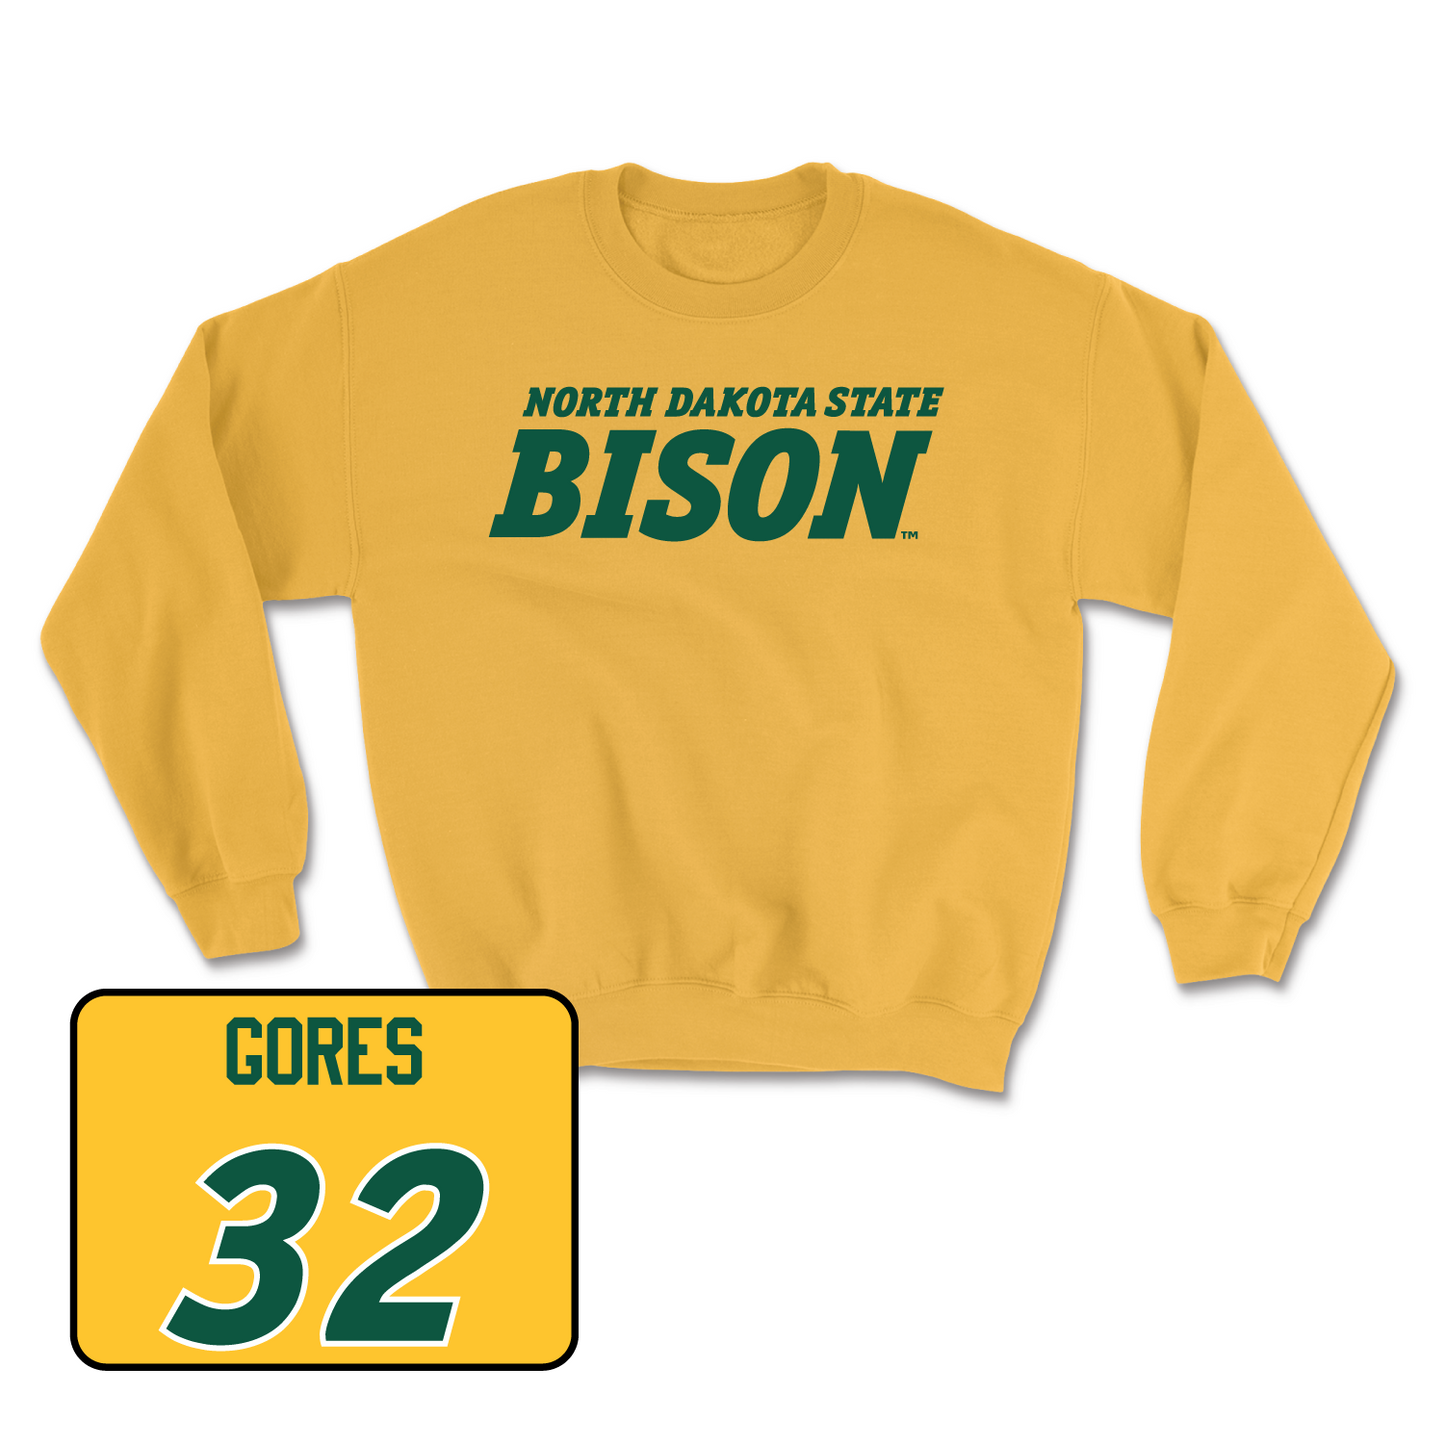 Gold Football Bison Crew 2 Youth Small / John Gores | #32